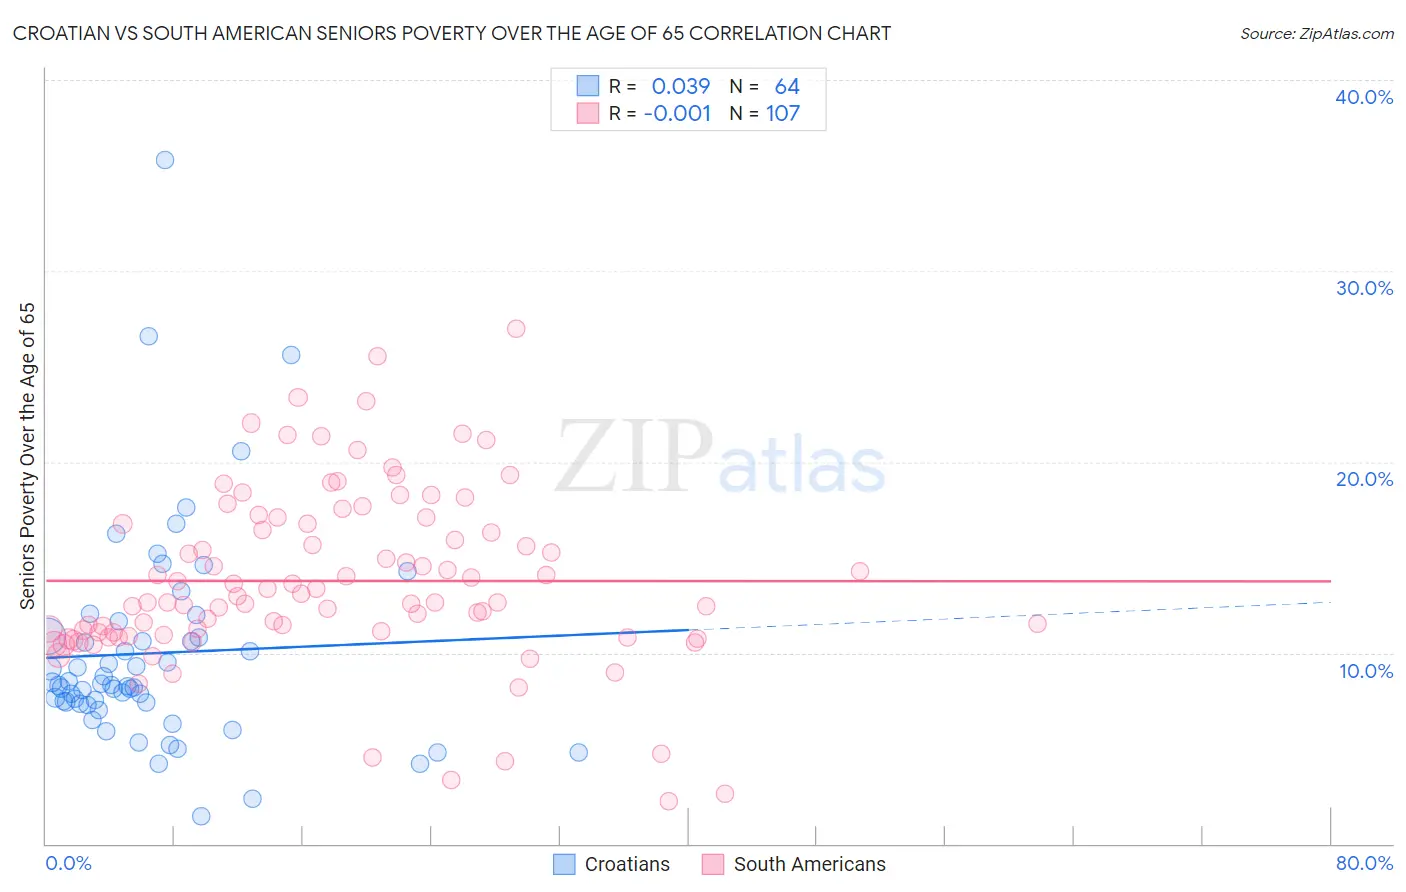 Croatian vs South American Seniors Poverty Over the Age of 65